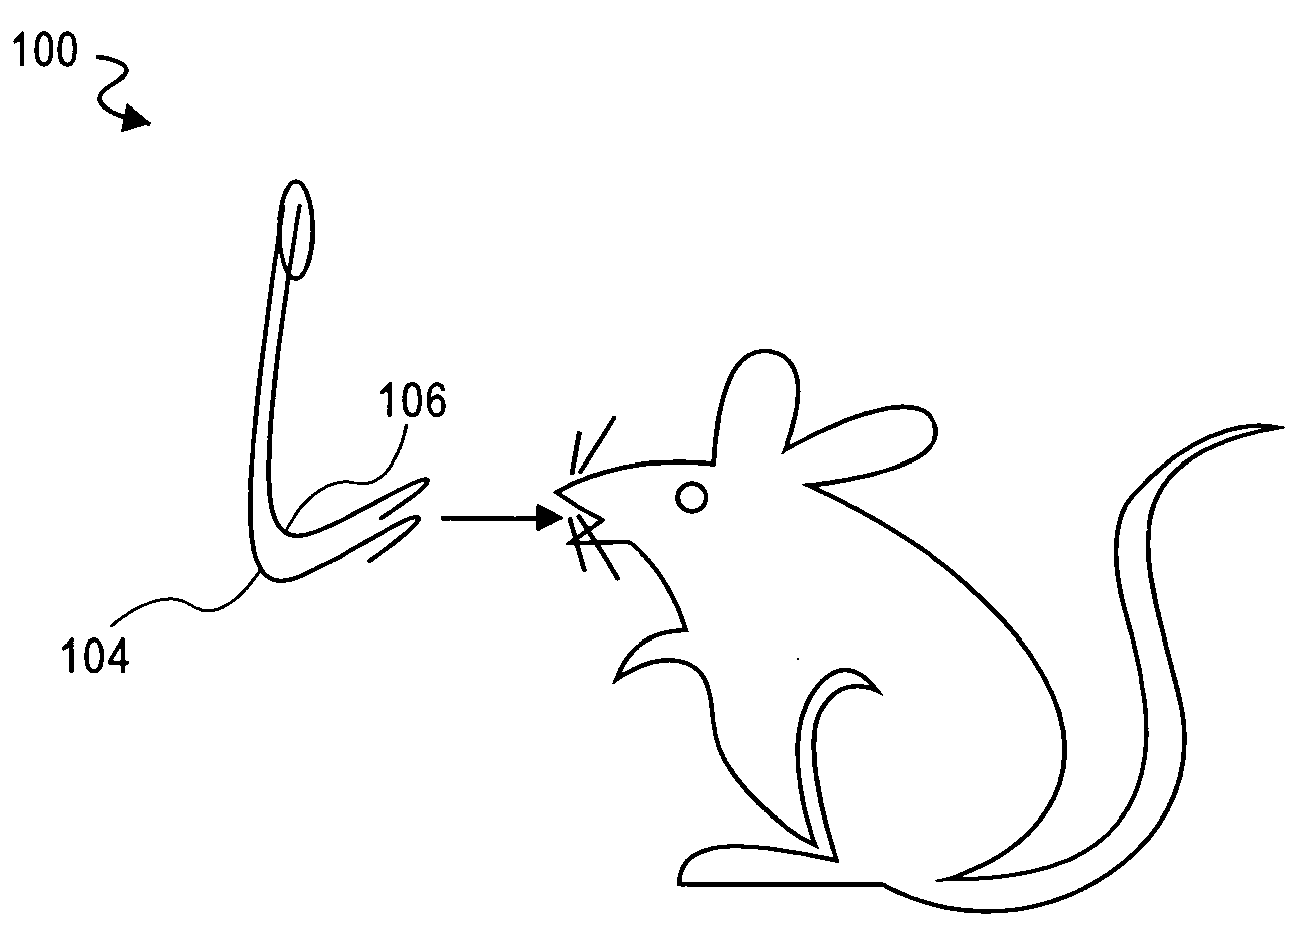 Collection Assembly for Obtaining Oral Samples From an Animal